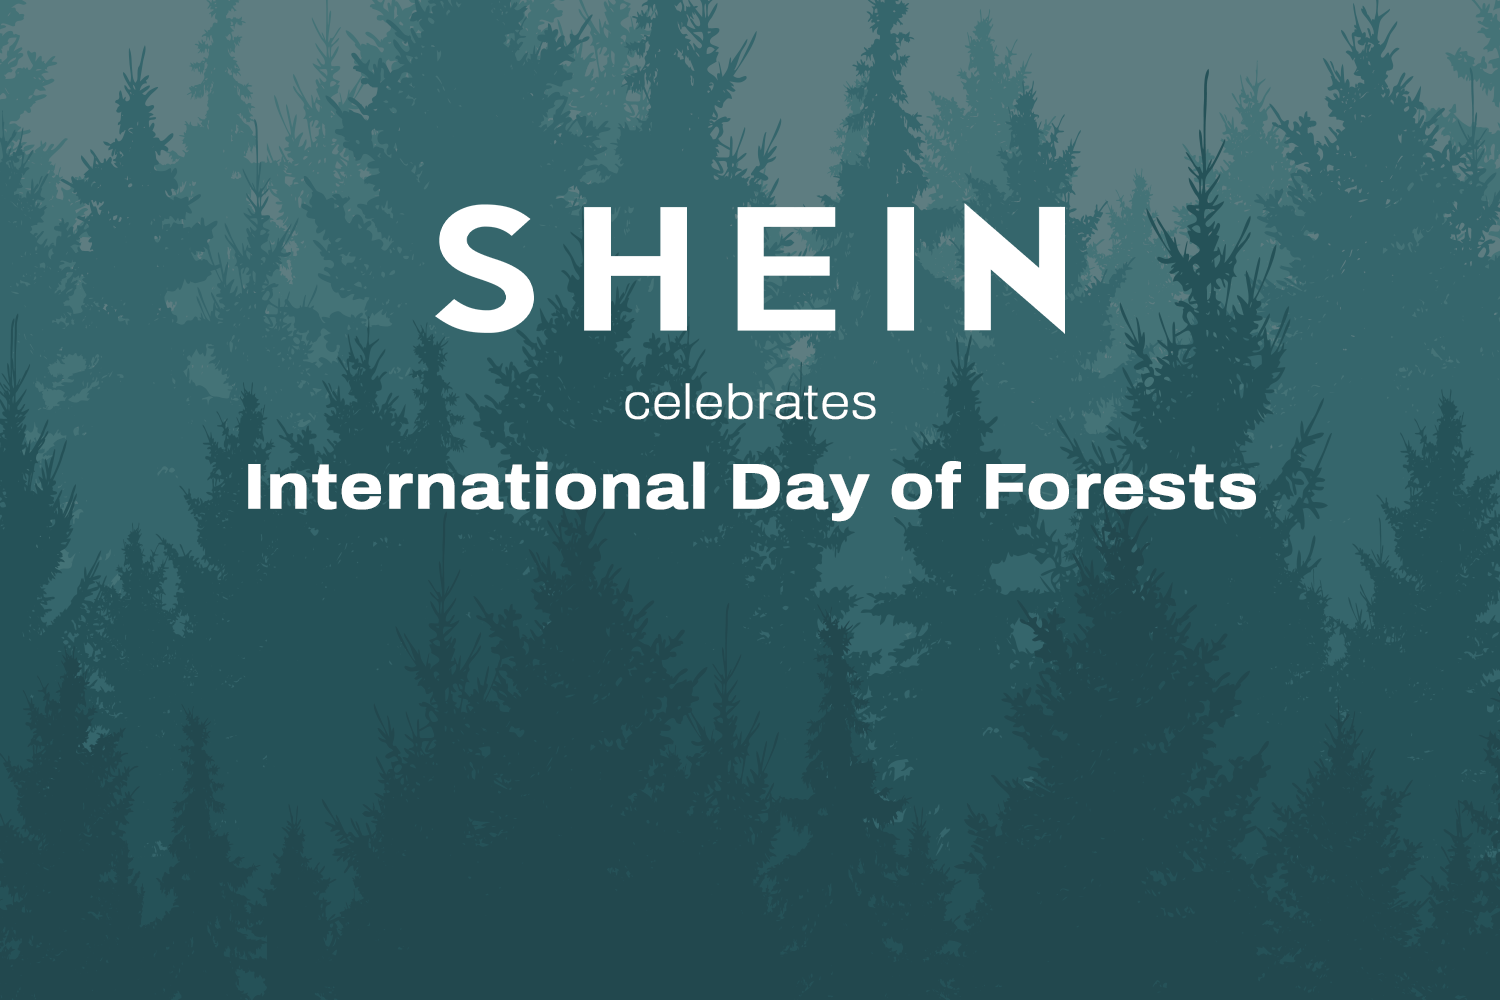 International Day of Forests Cover Image, with a dark background of trees